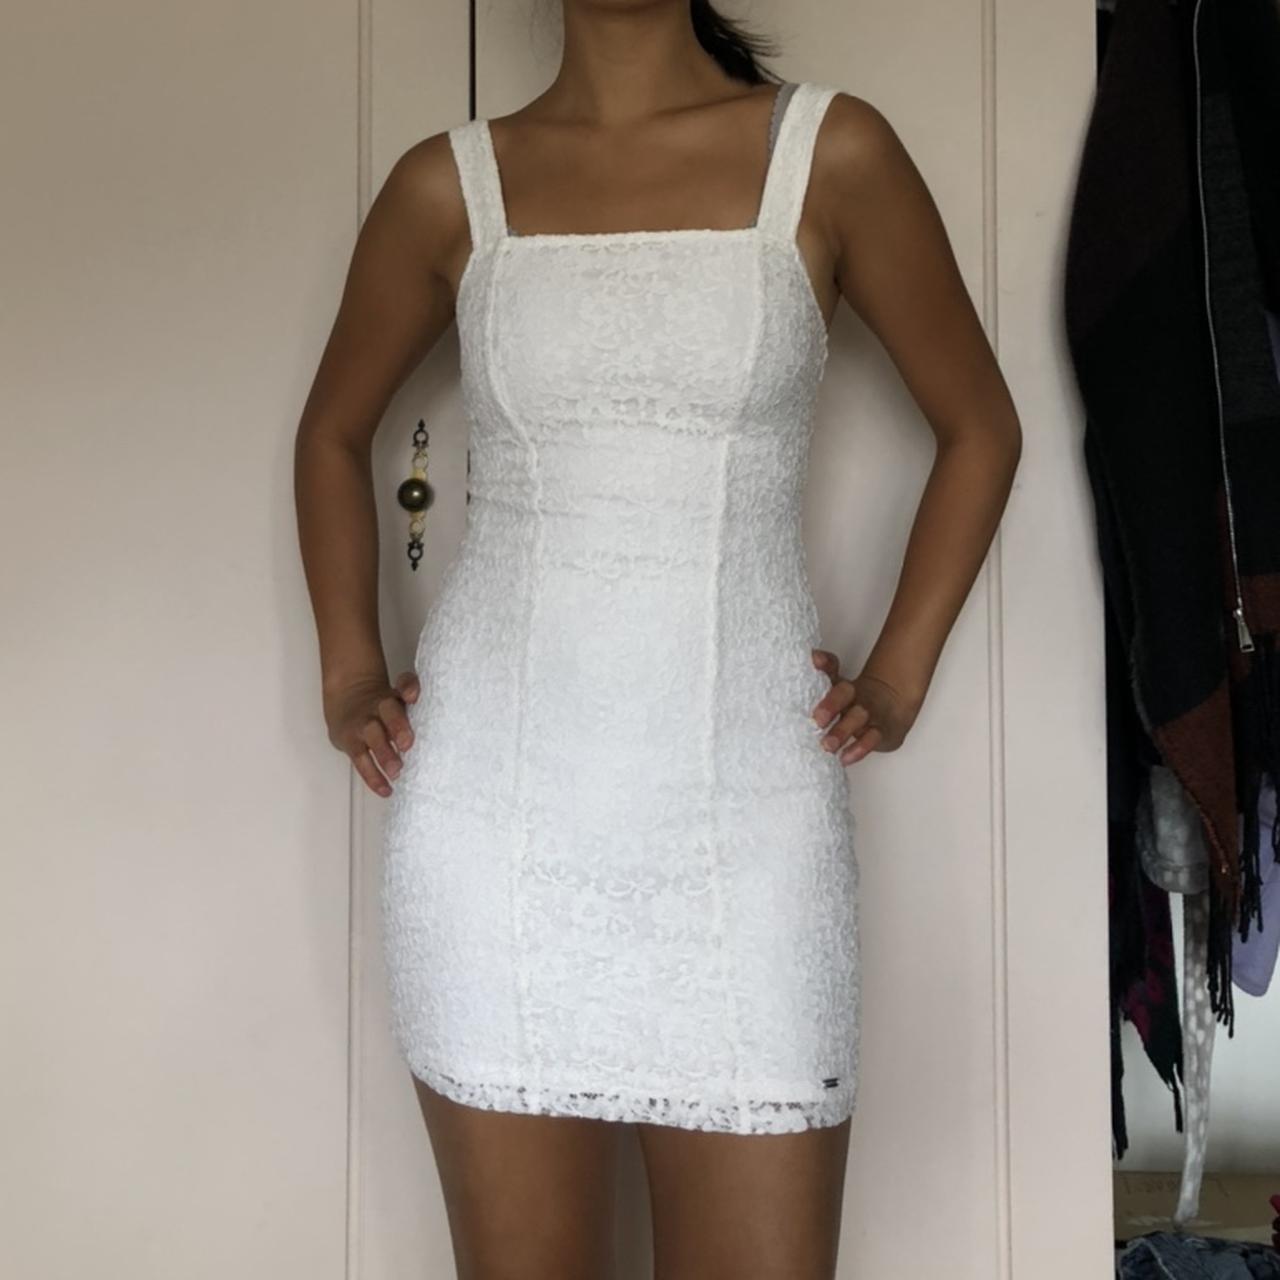 Lovely white lace dress, HOLLISTER XS. Tight fitting